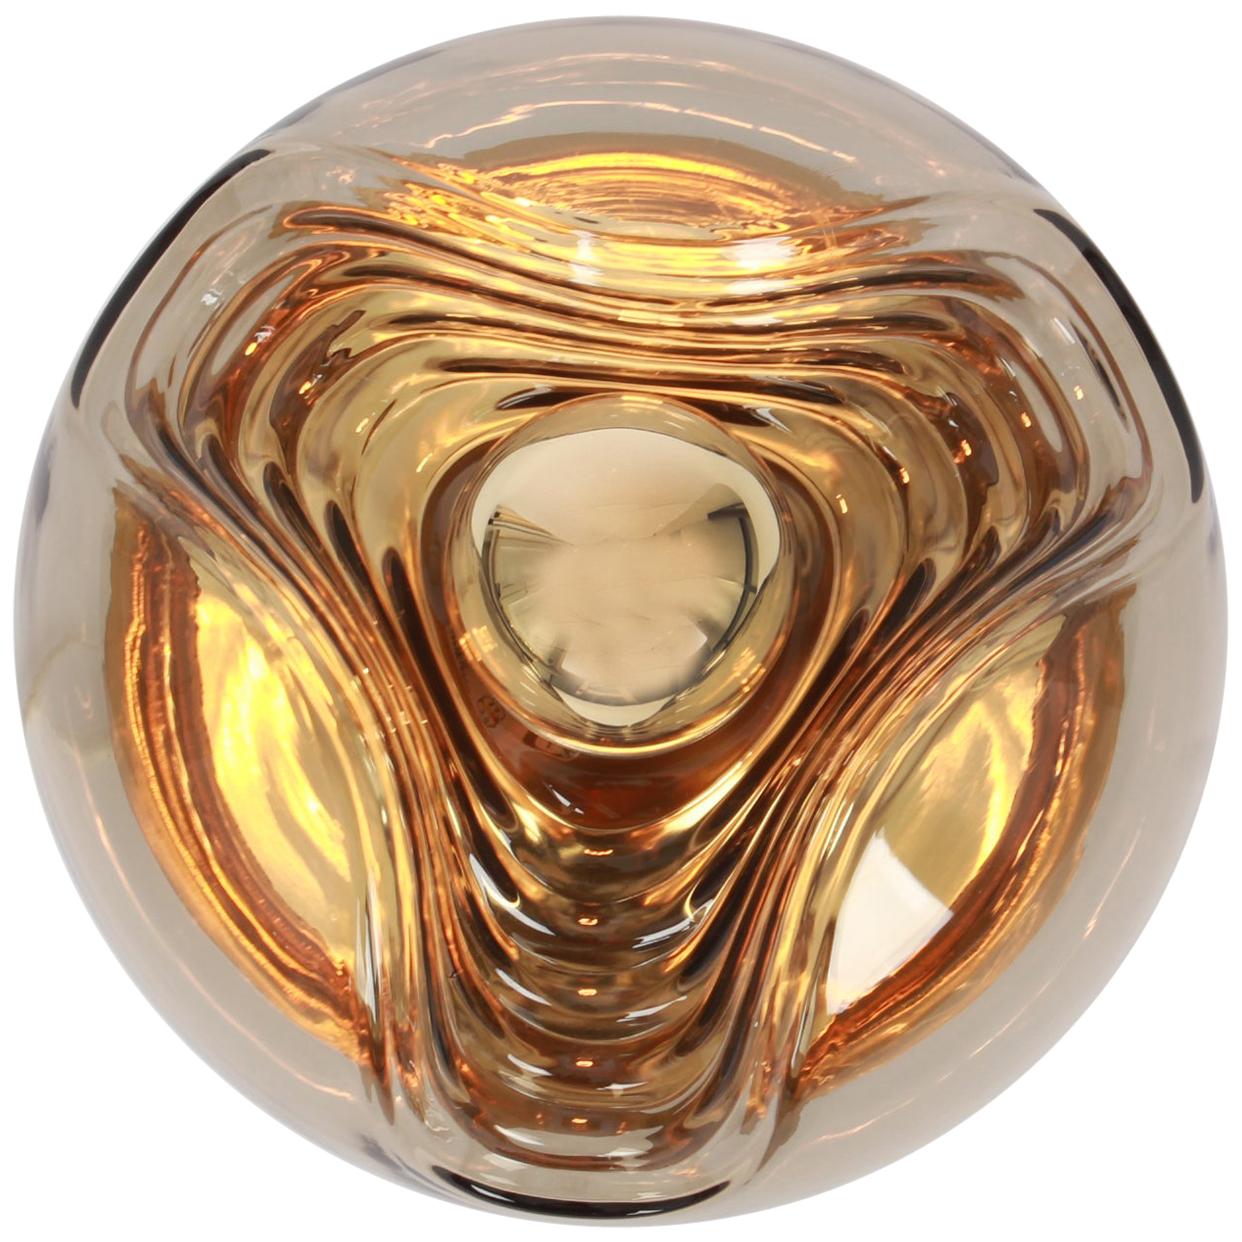 A special round biomorphic smoked glass wall sconce designed by Koch & Lowy for Peill & Putzler, manufactured in Germany, circa 1970s.

Sockets: One x E27 standard bulb. (100 W max).- and function on the voltage from 110 to 240 volts. (For USA -